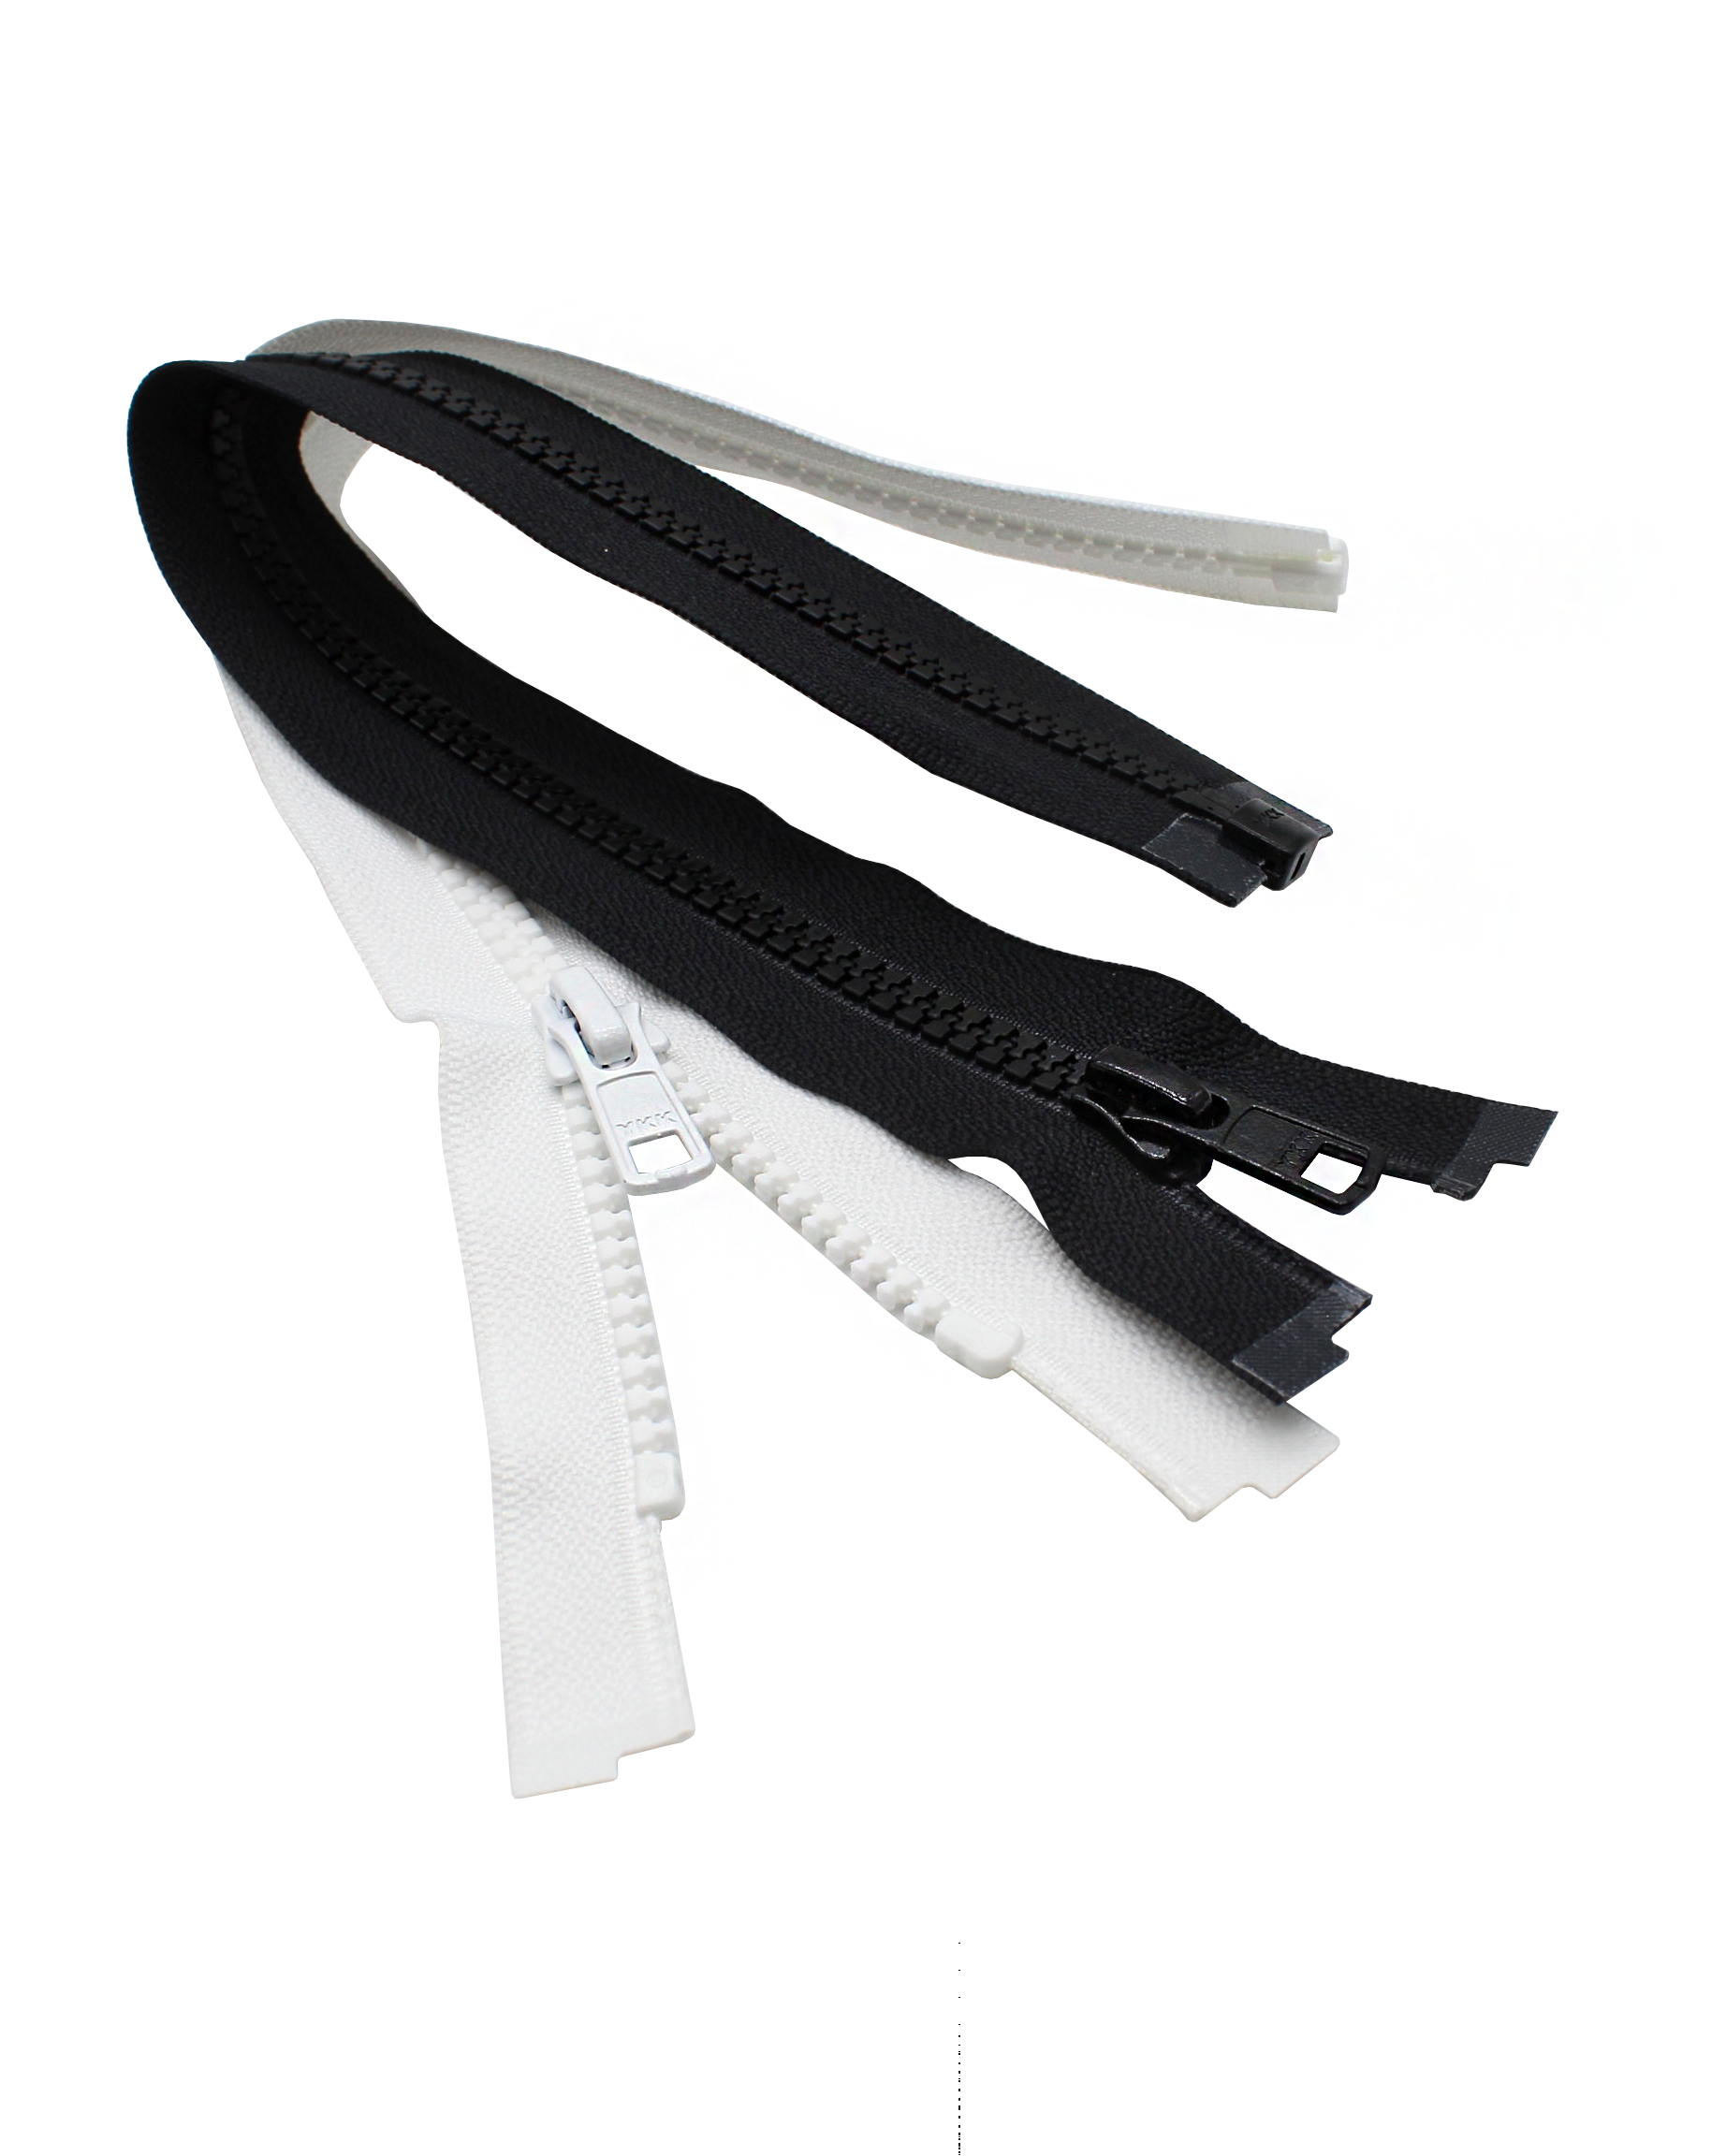  #10 White Separating Plastic Zippers 36 Inch Heavy